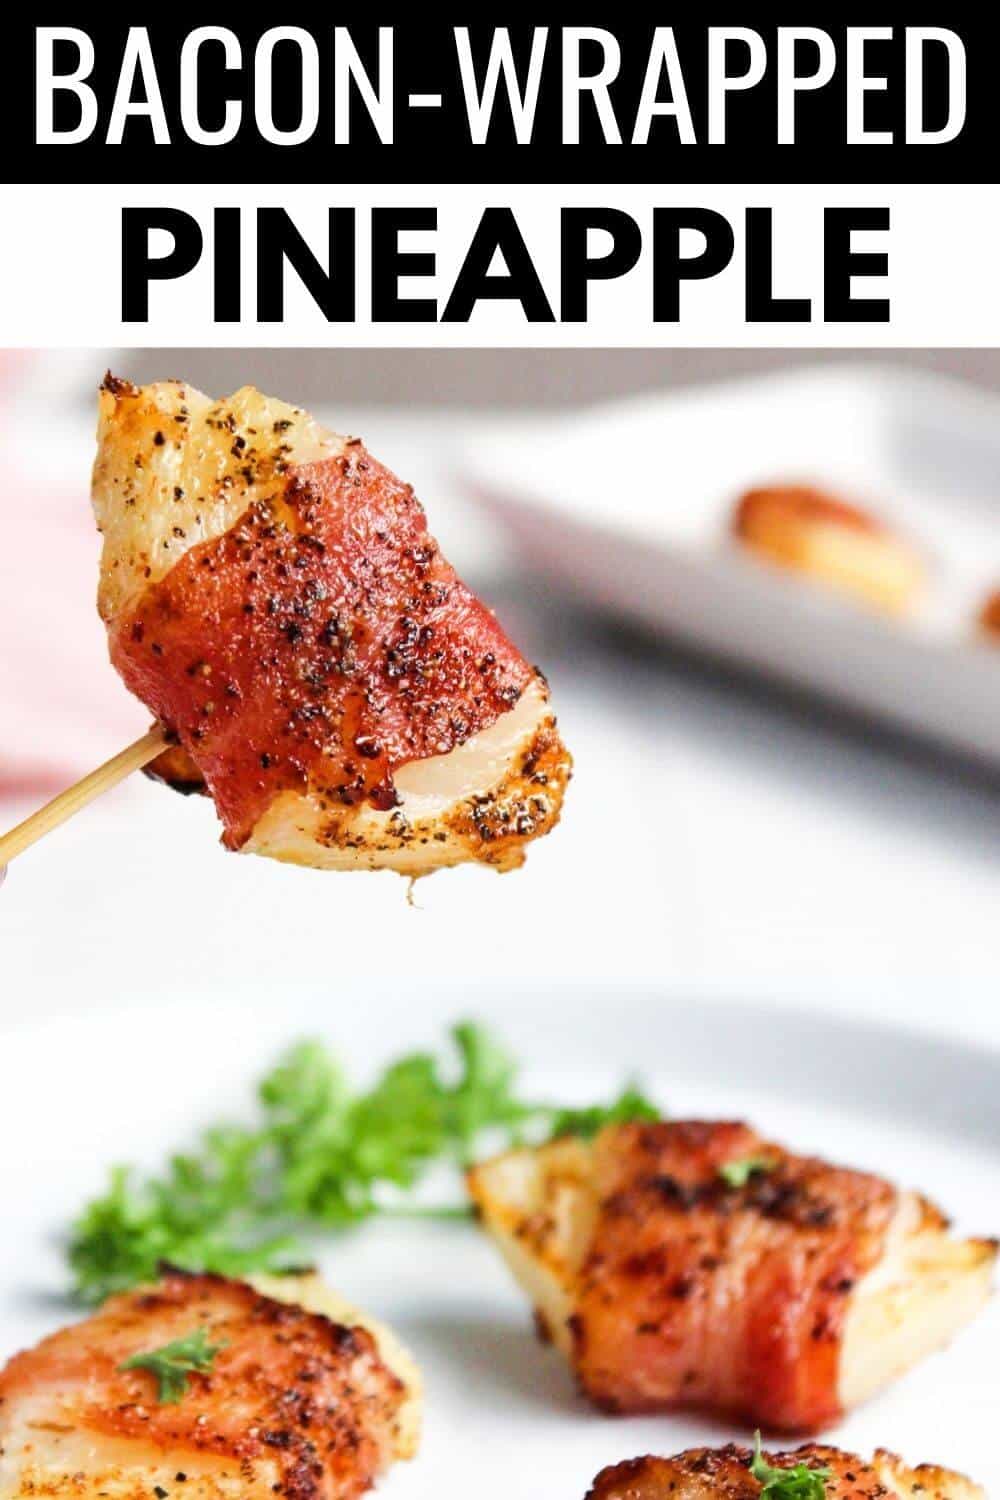 Bacon-wrapped pineapple with title text overlay.